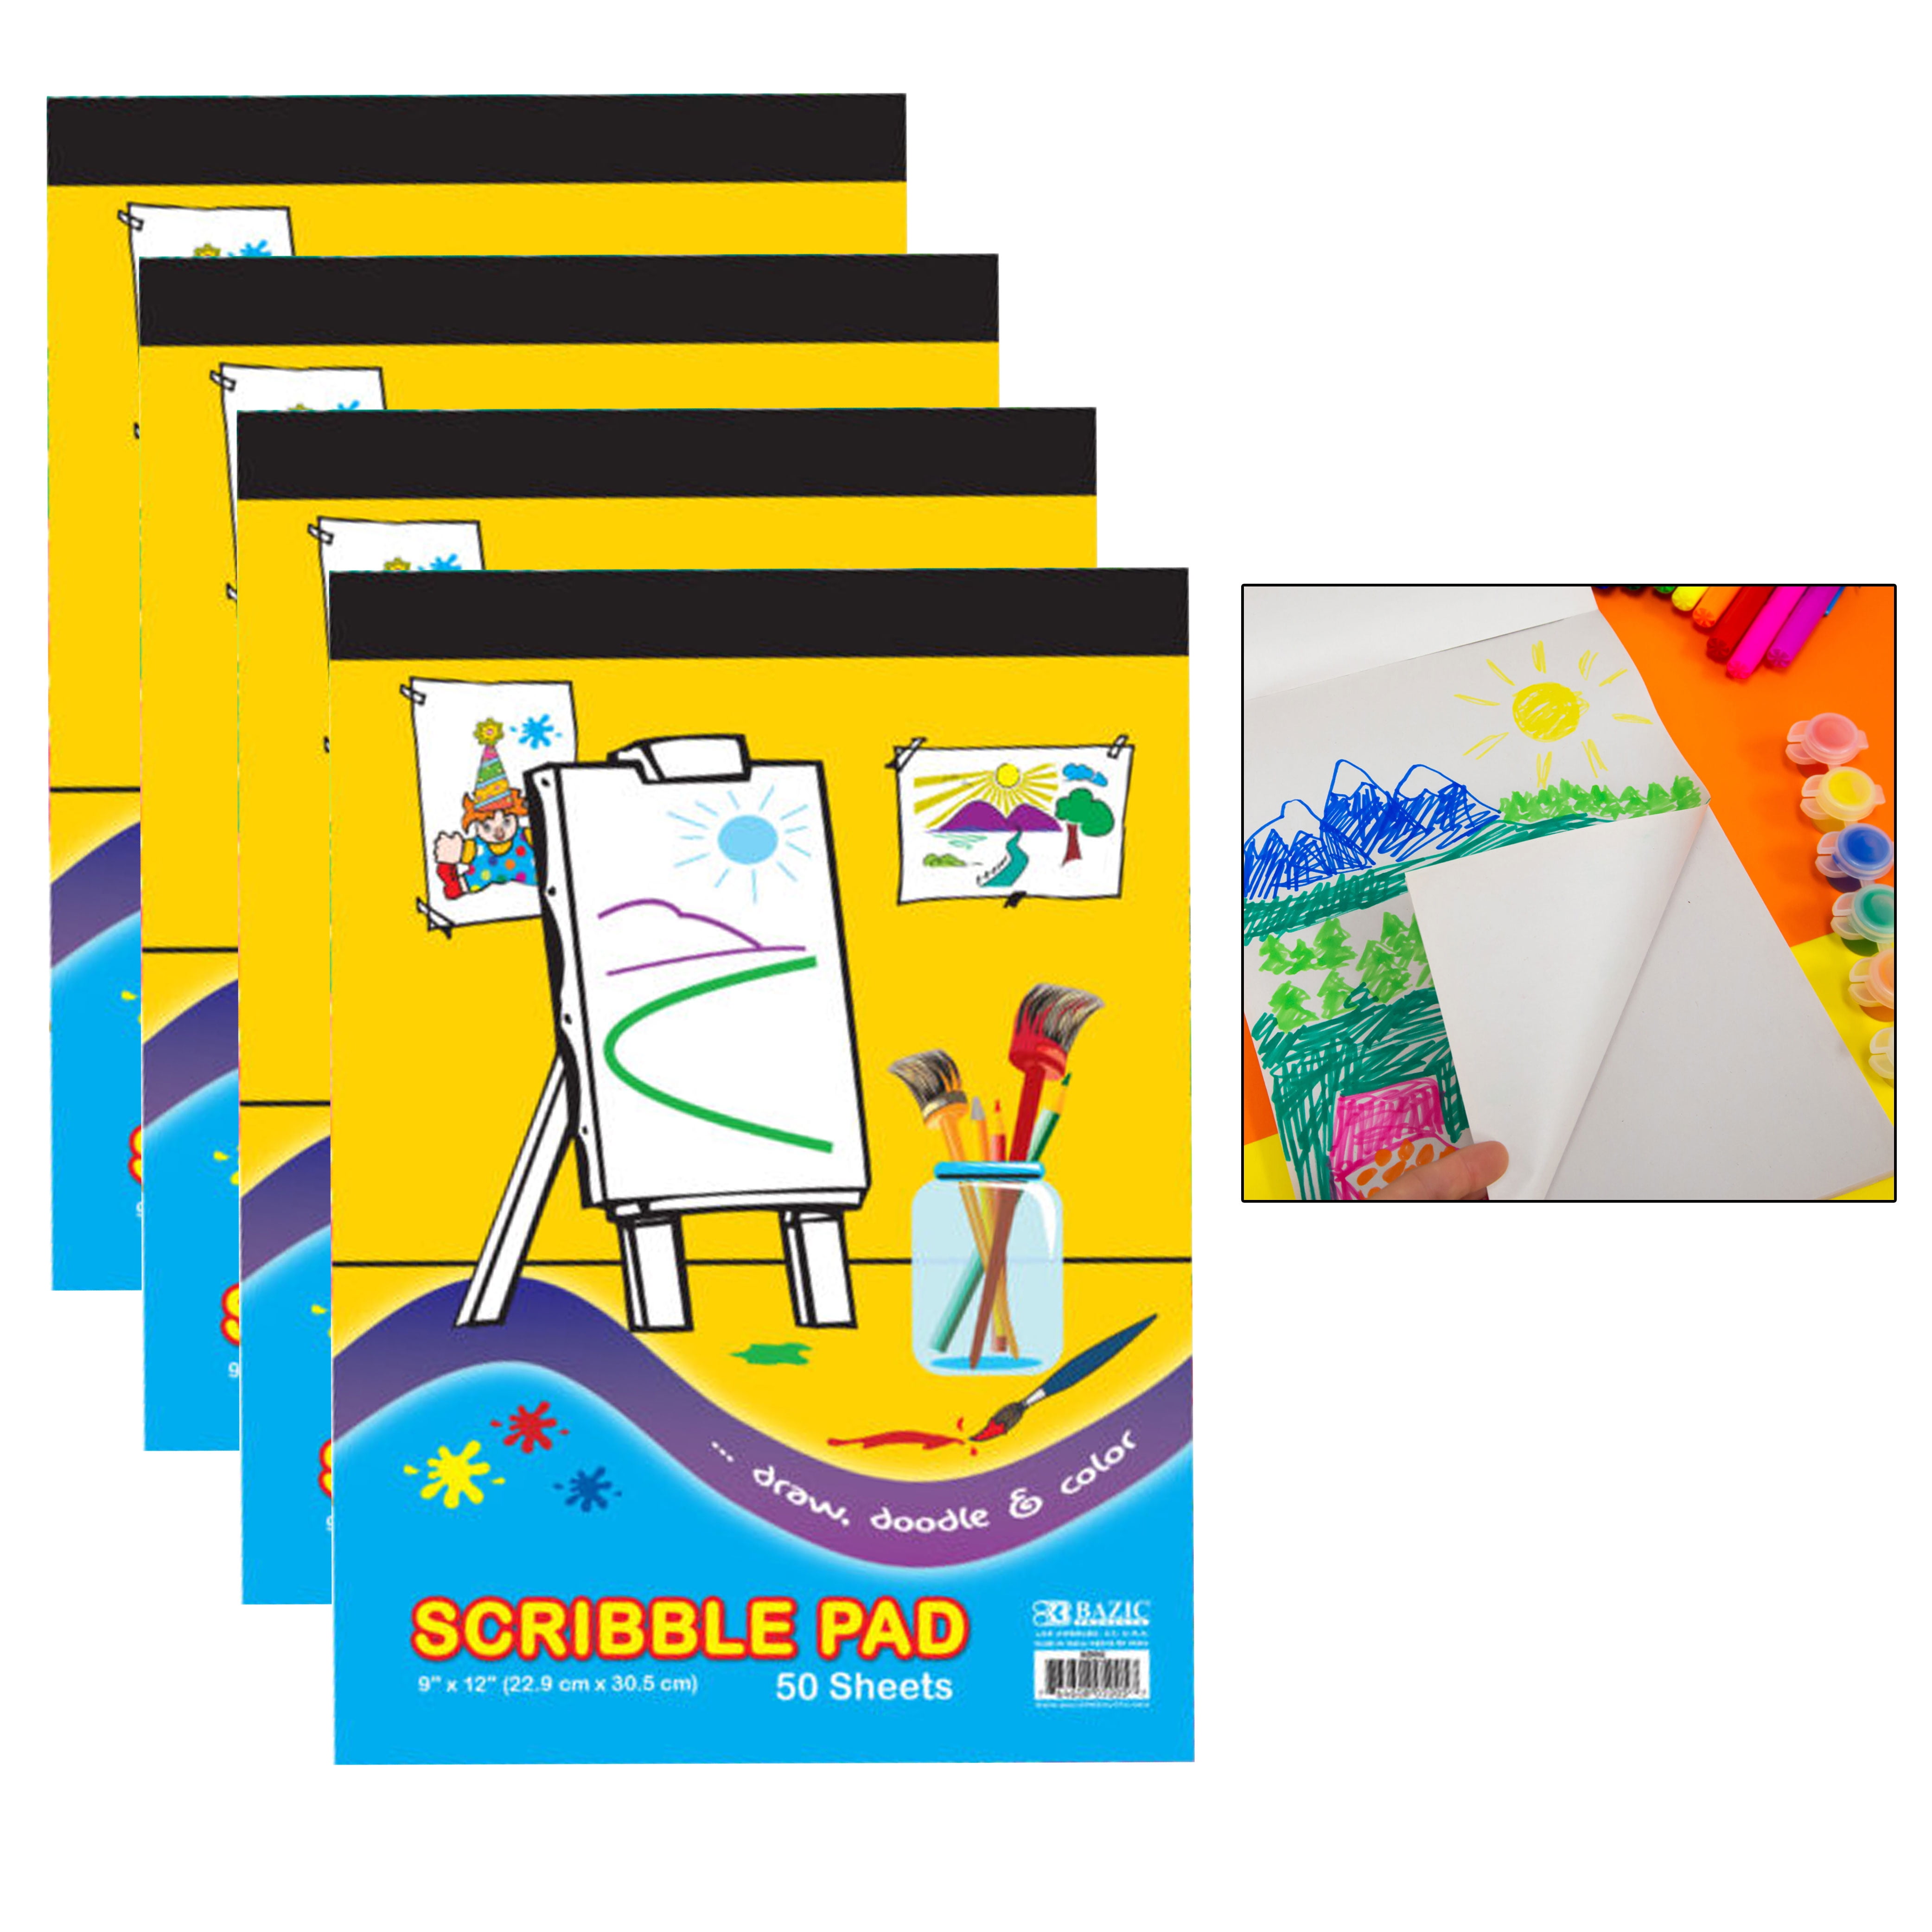 Grumbacher Mixed Media Art Paper Pad 5.5x8.5 98lb/160GSM, 60 Paper Sheets,  Side Wire. Great for all ages. 